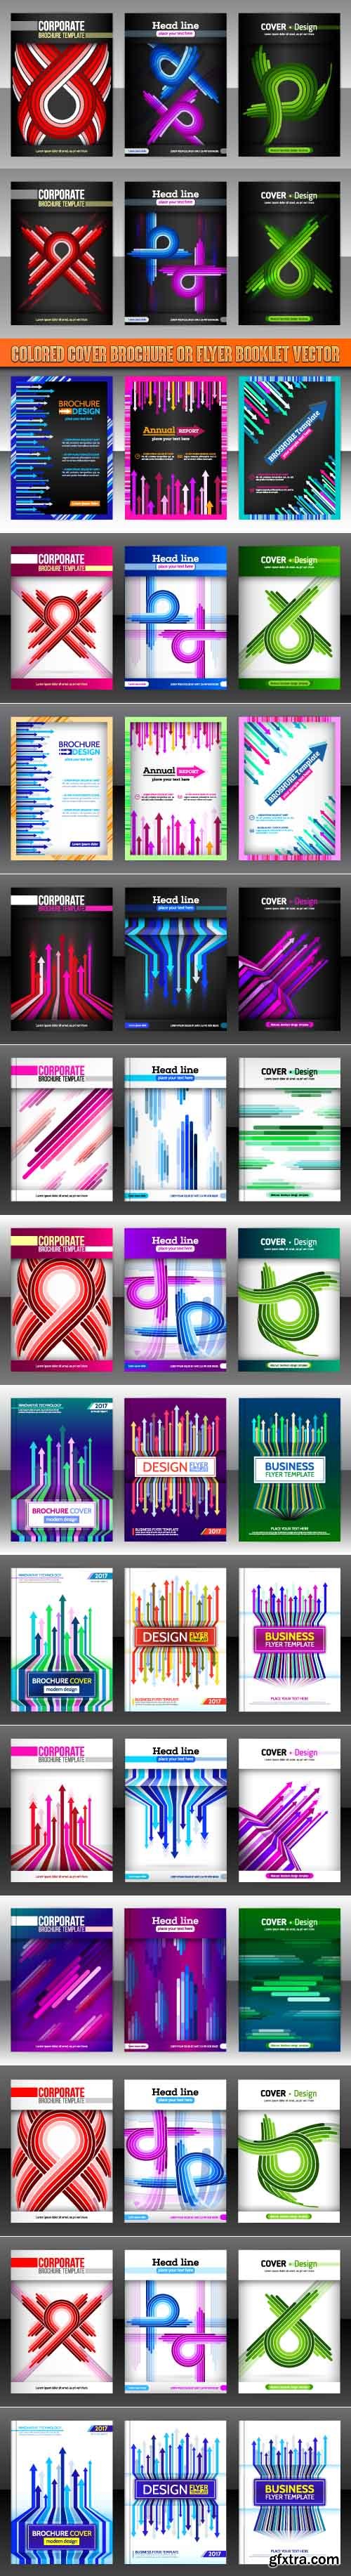 Colored cover brochure or flyer booklet vector